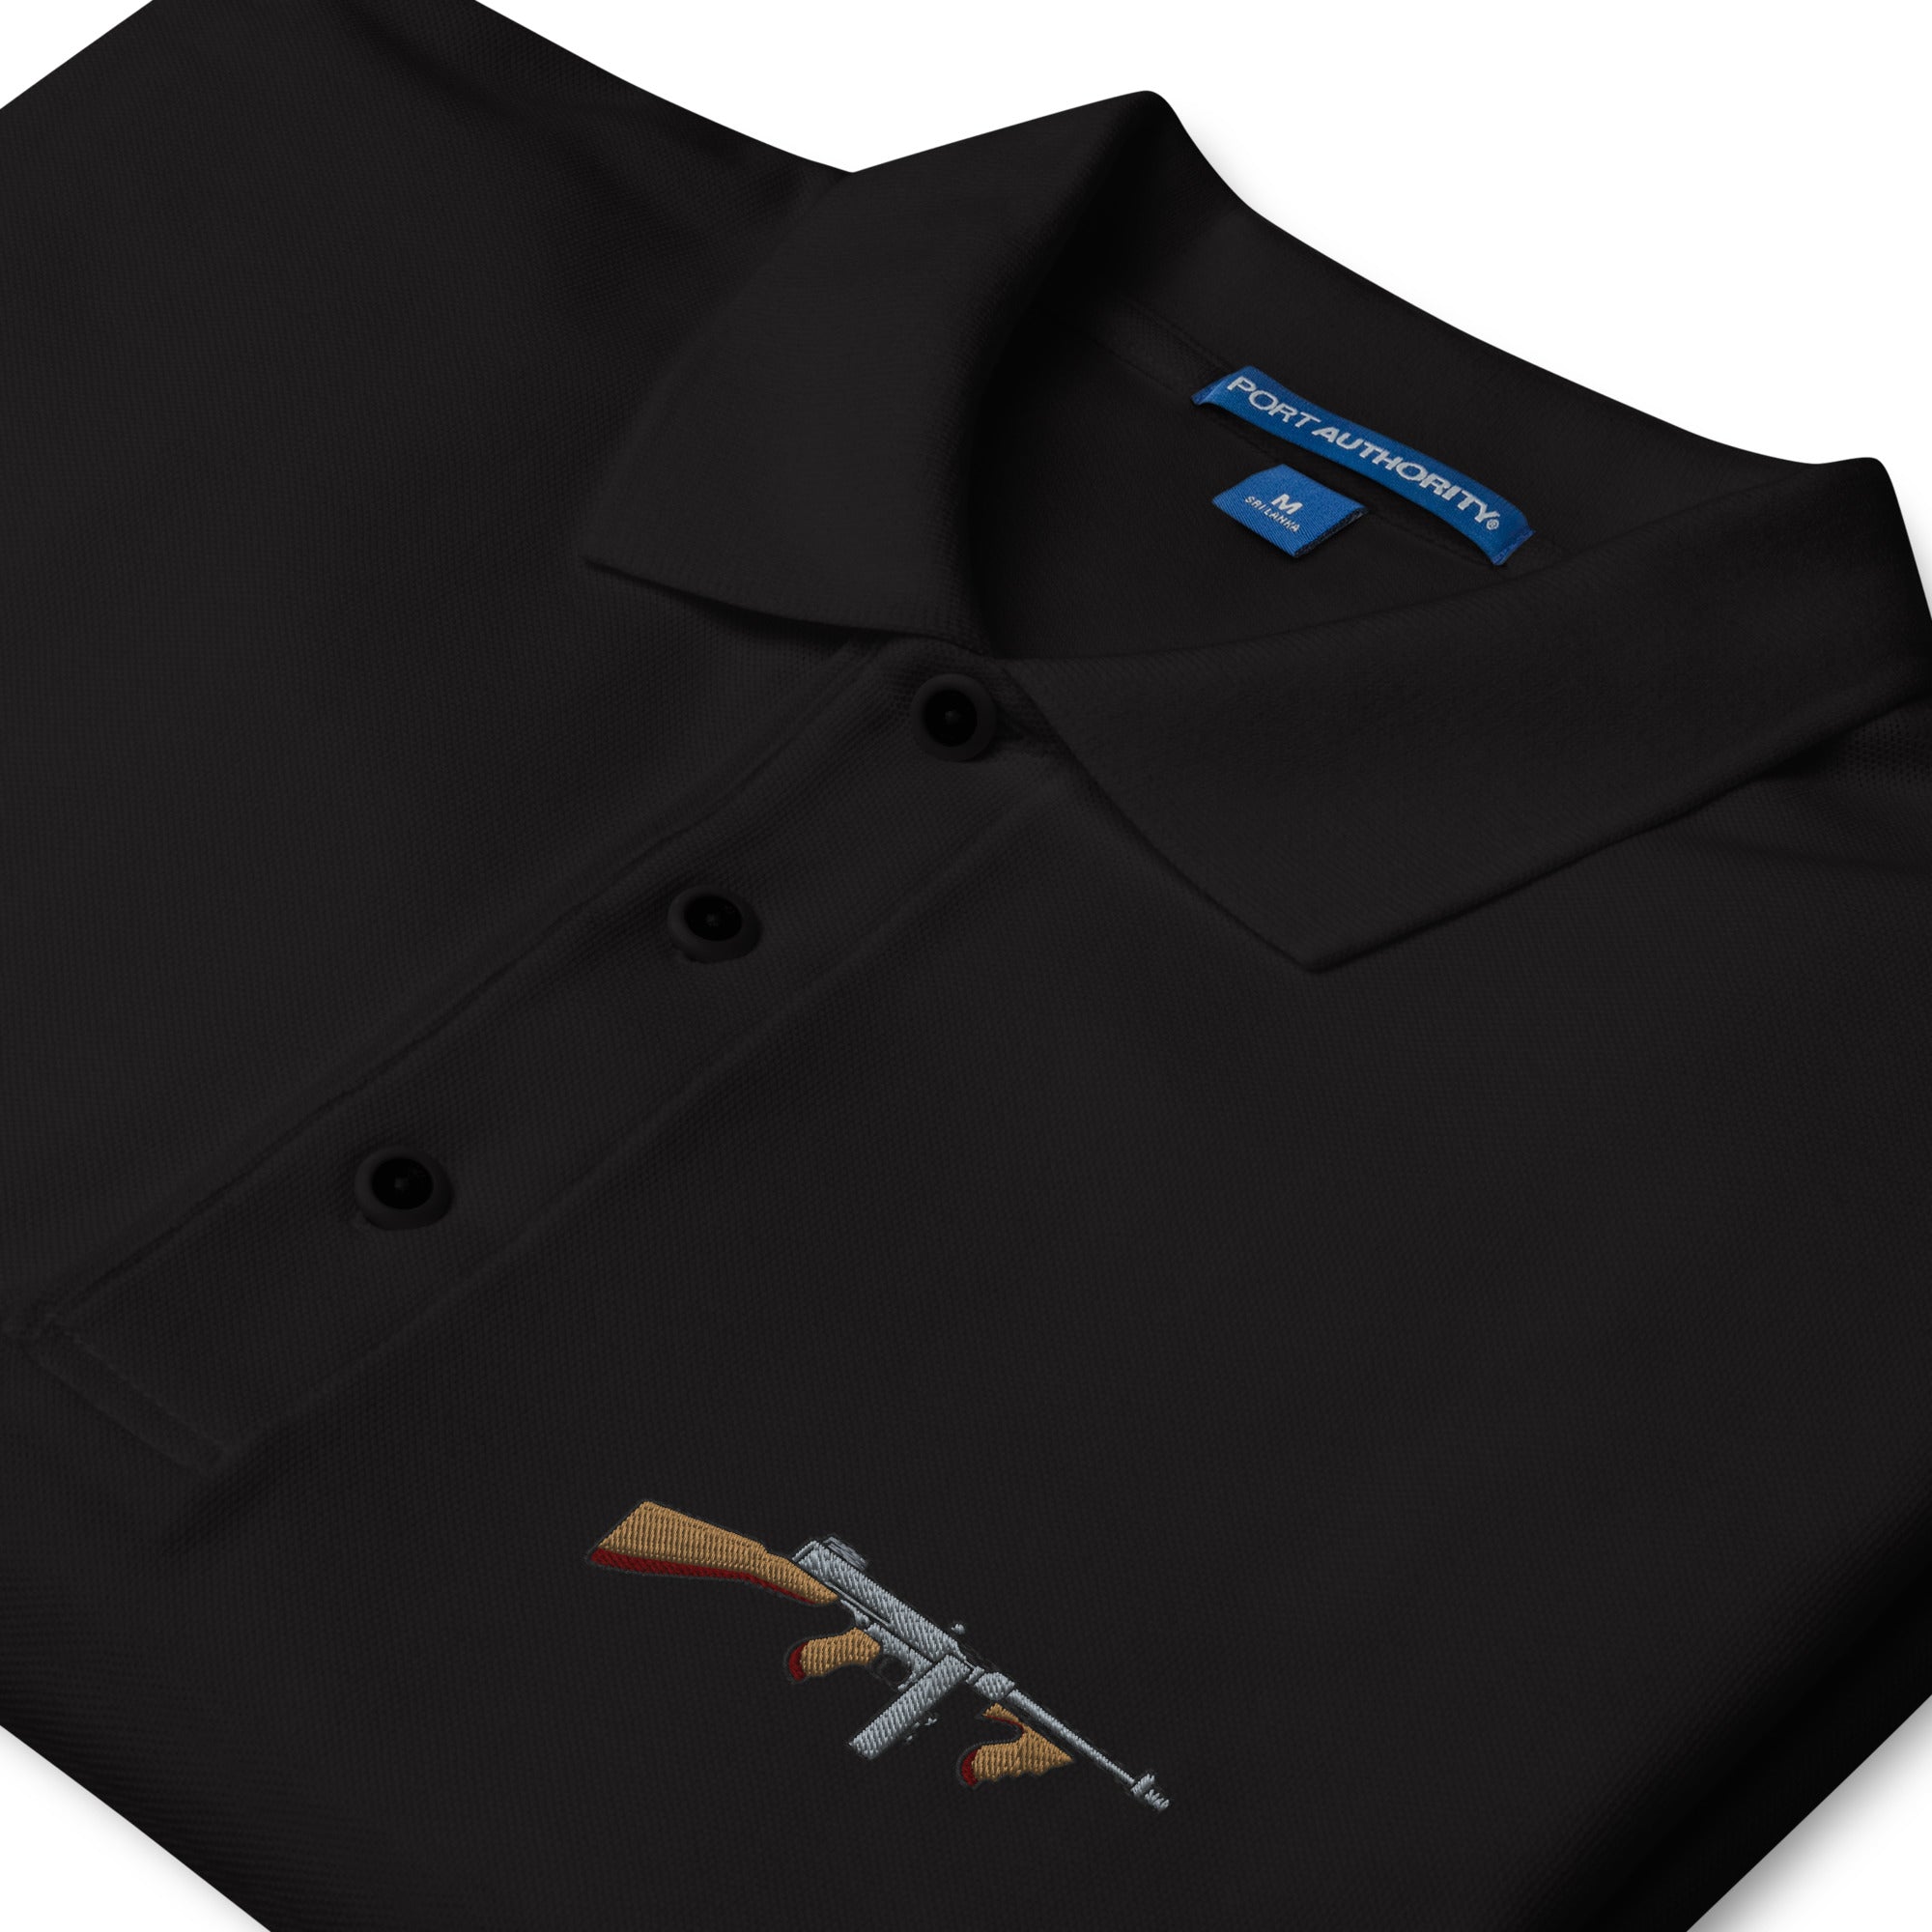 Tommy Gun with Drum Mag Men's Polo